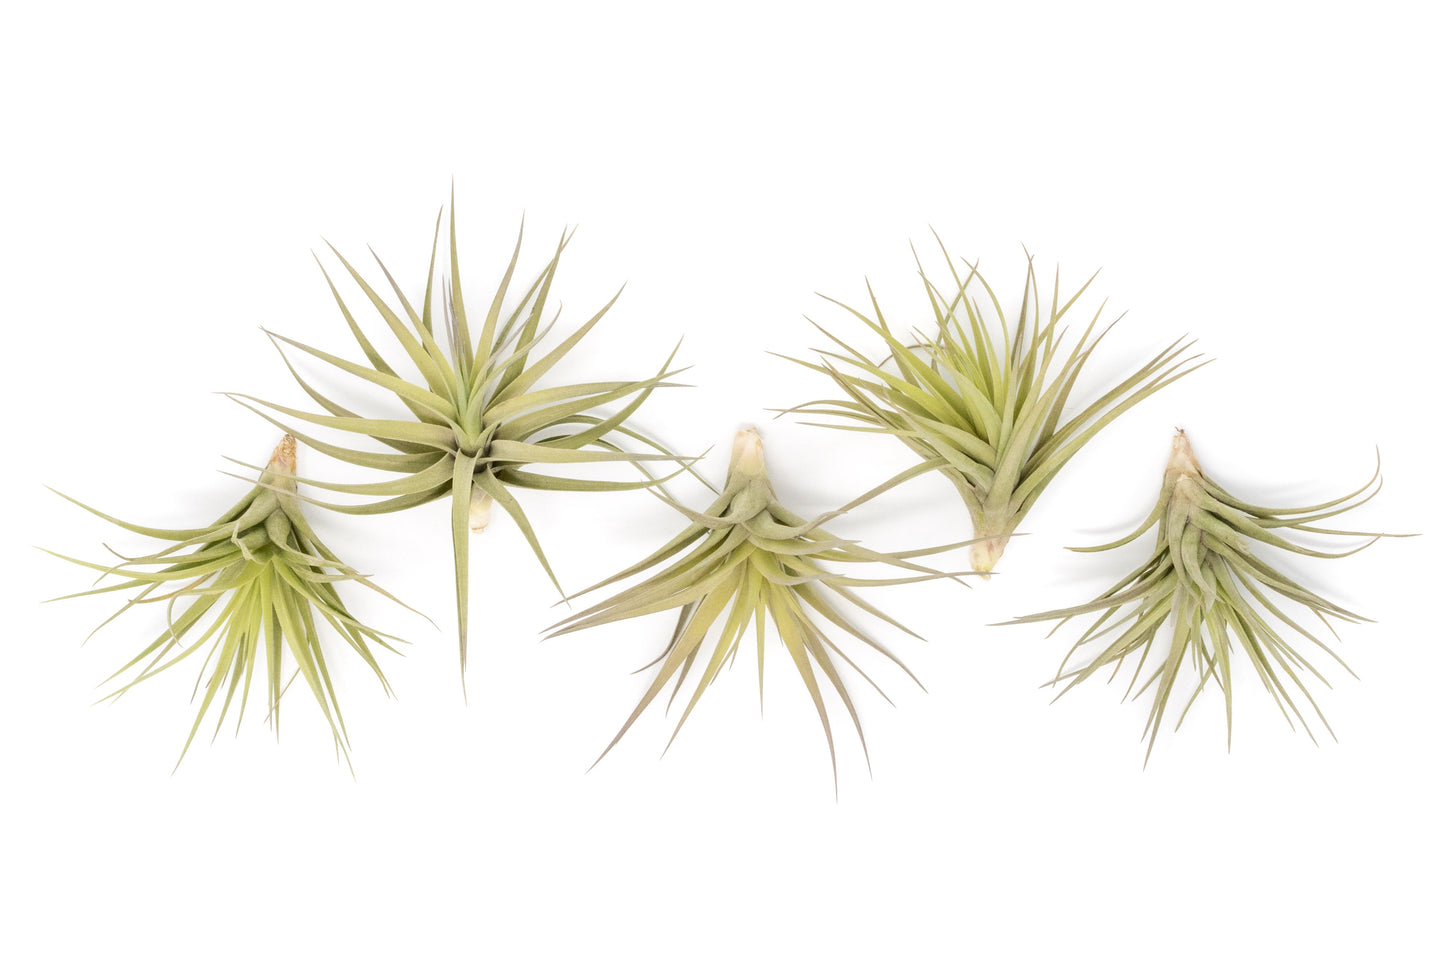 Tillandsia Aeranthos - Clavel del Aire - "Carnation of the Air" Air Plants